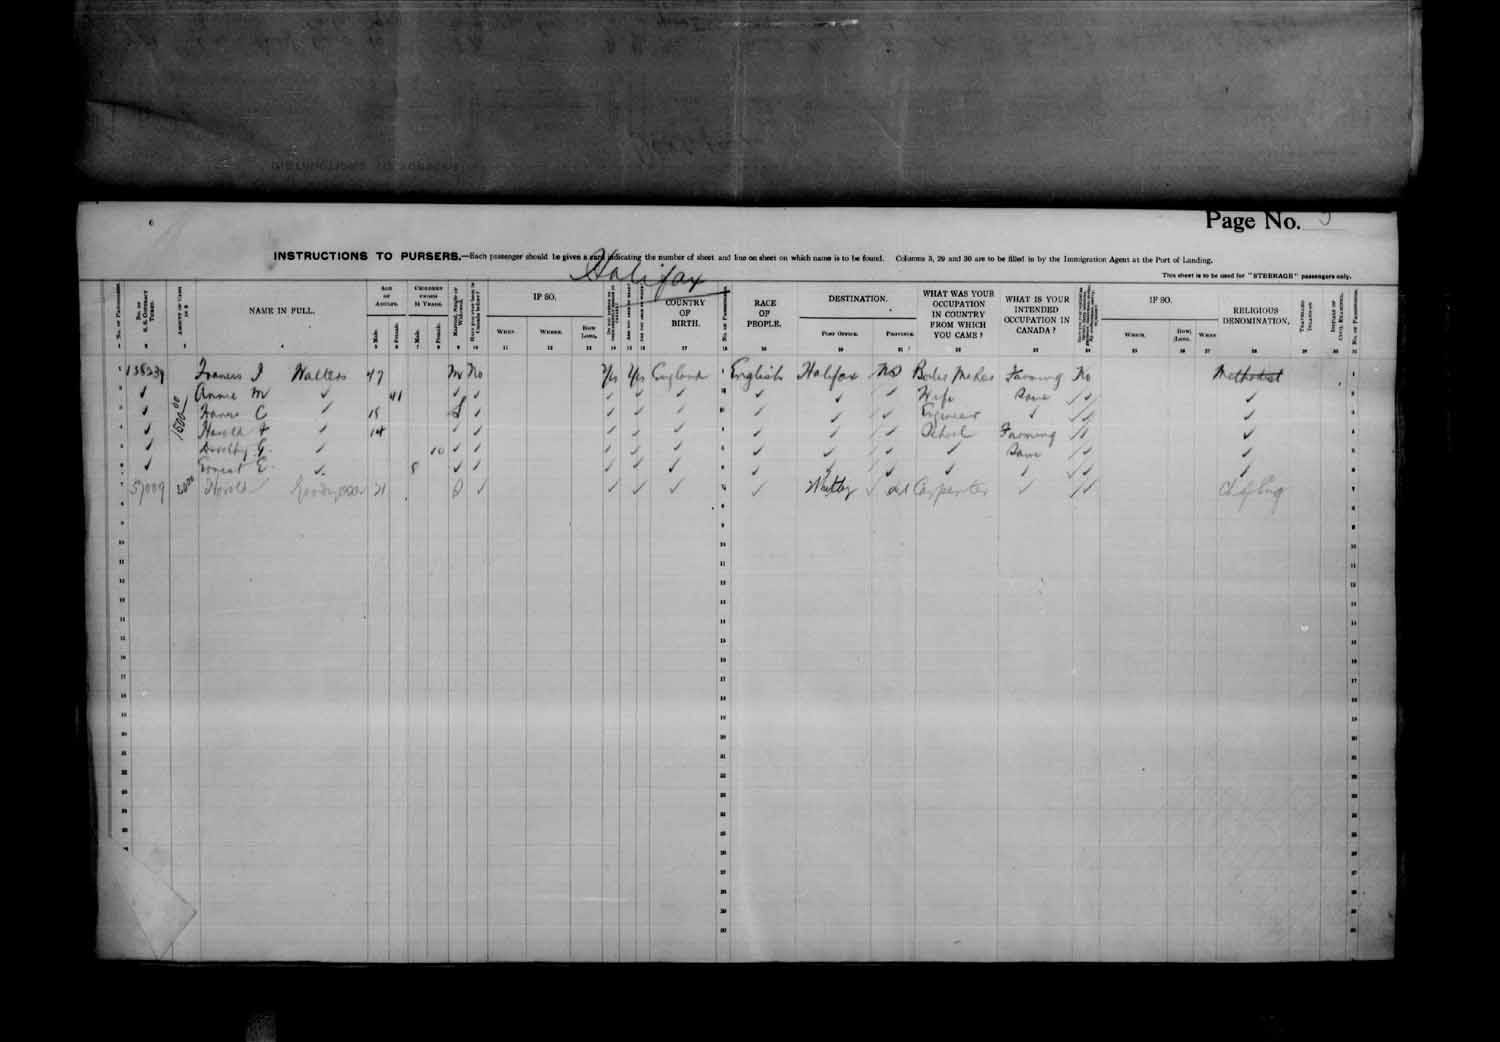 Digitized page of Quebec Passenger Lists for Image No.: e003684042